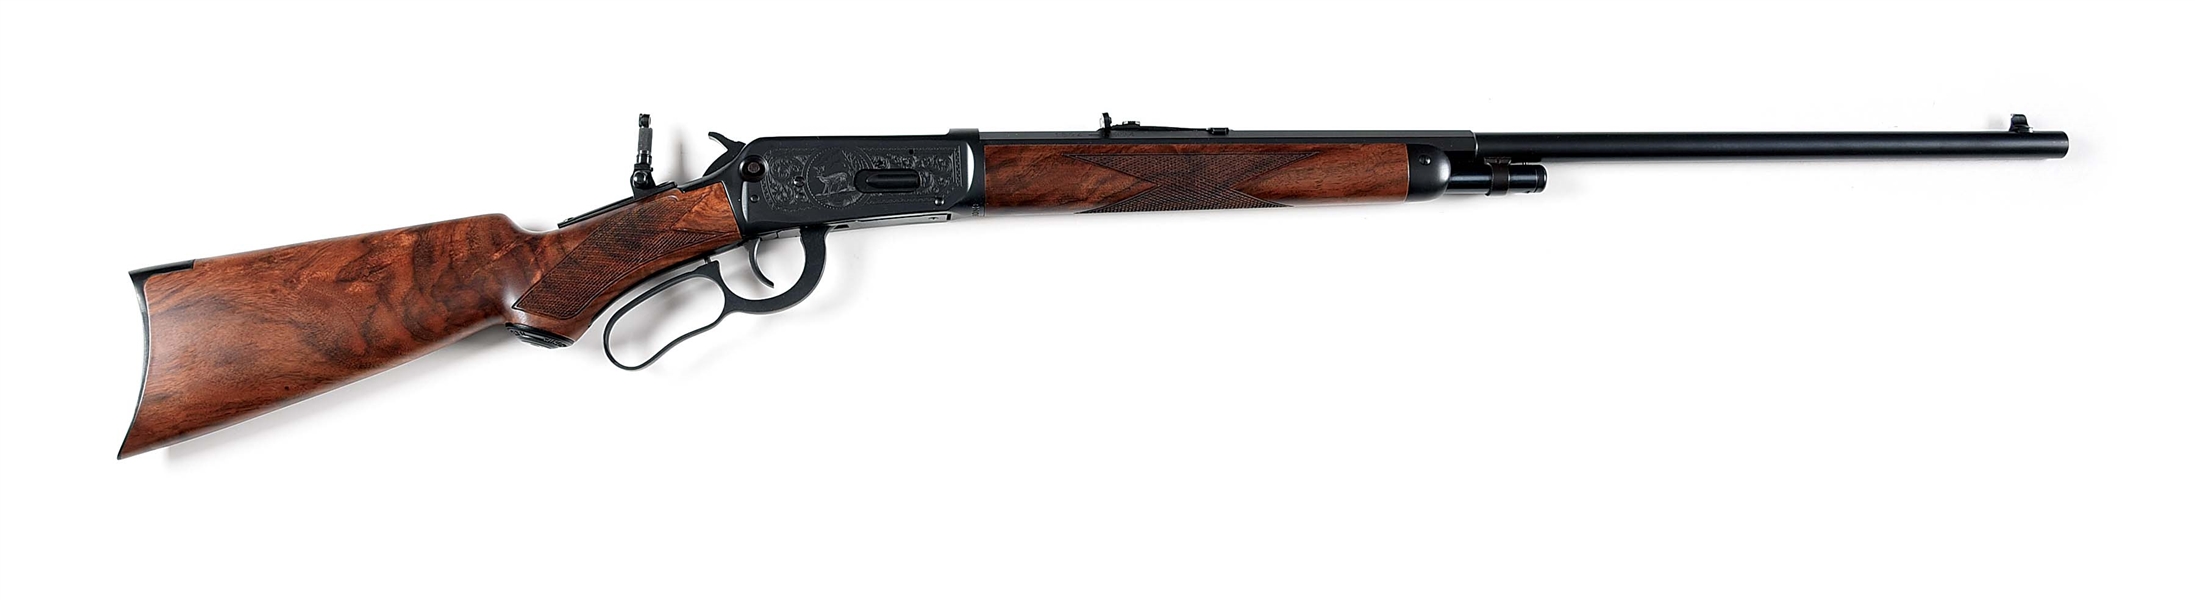 (M) WINCHESTER MODEL 1894 LIMITED EDITION GRADE I CENTENNIAL LEVER ACTION RIFLE WITH FACTORY BOX.